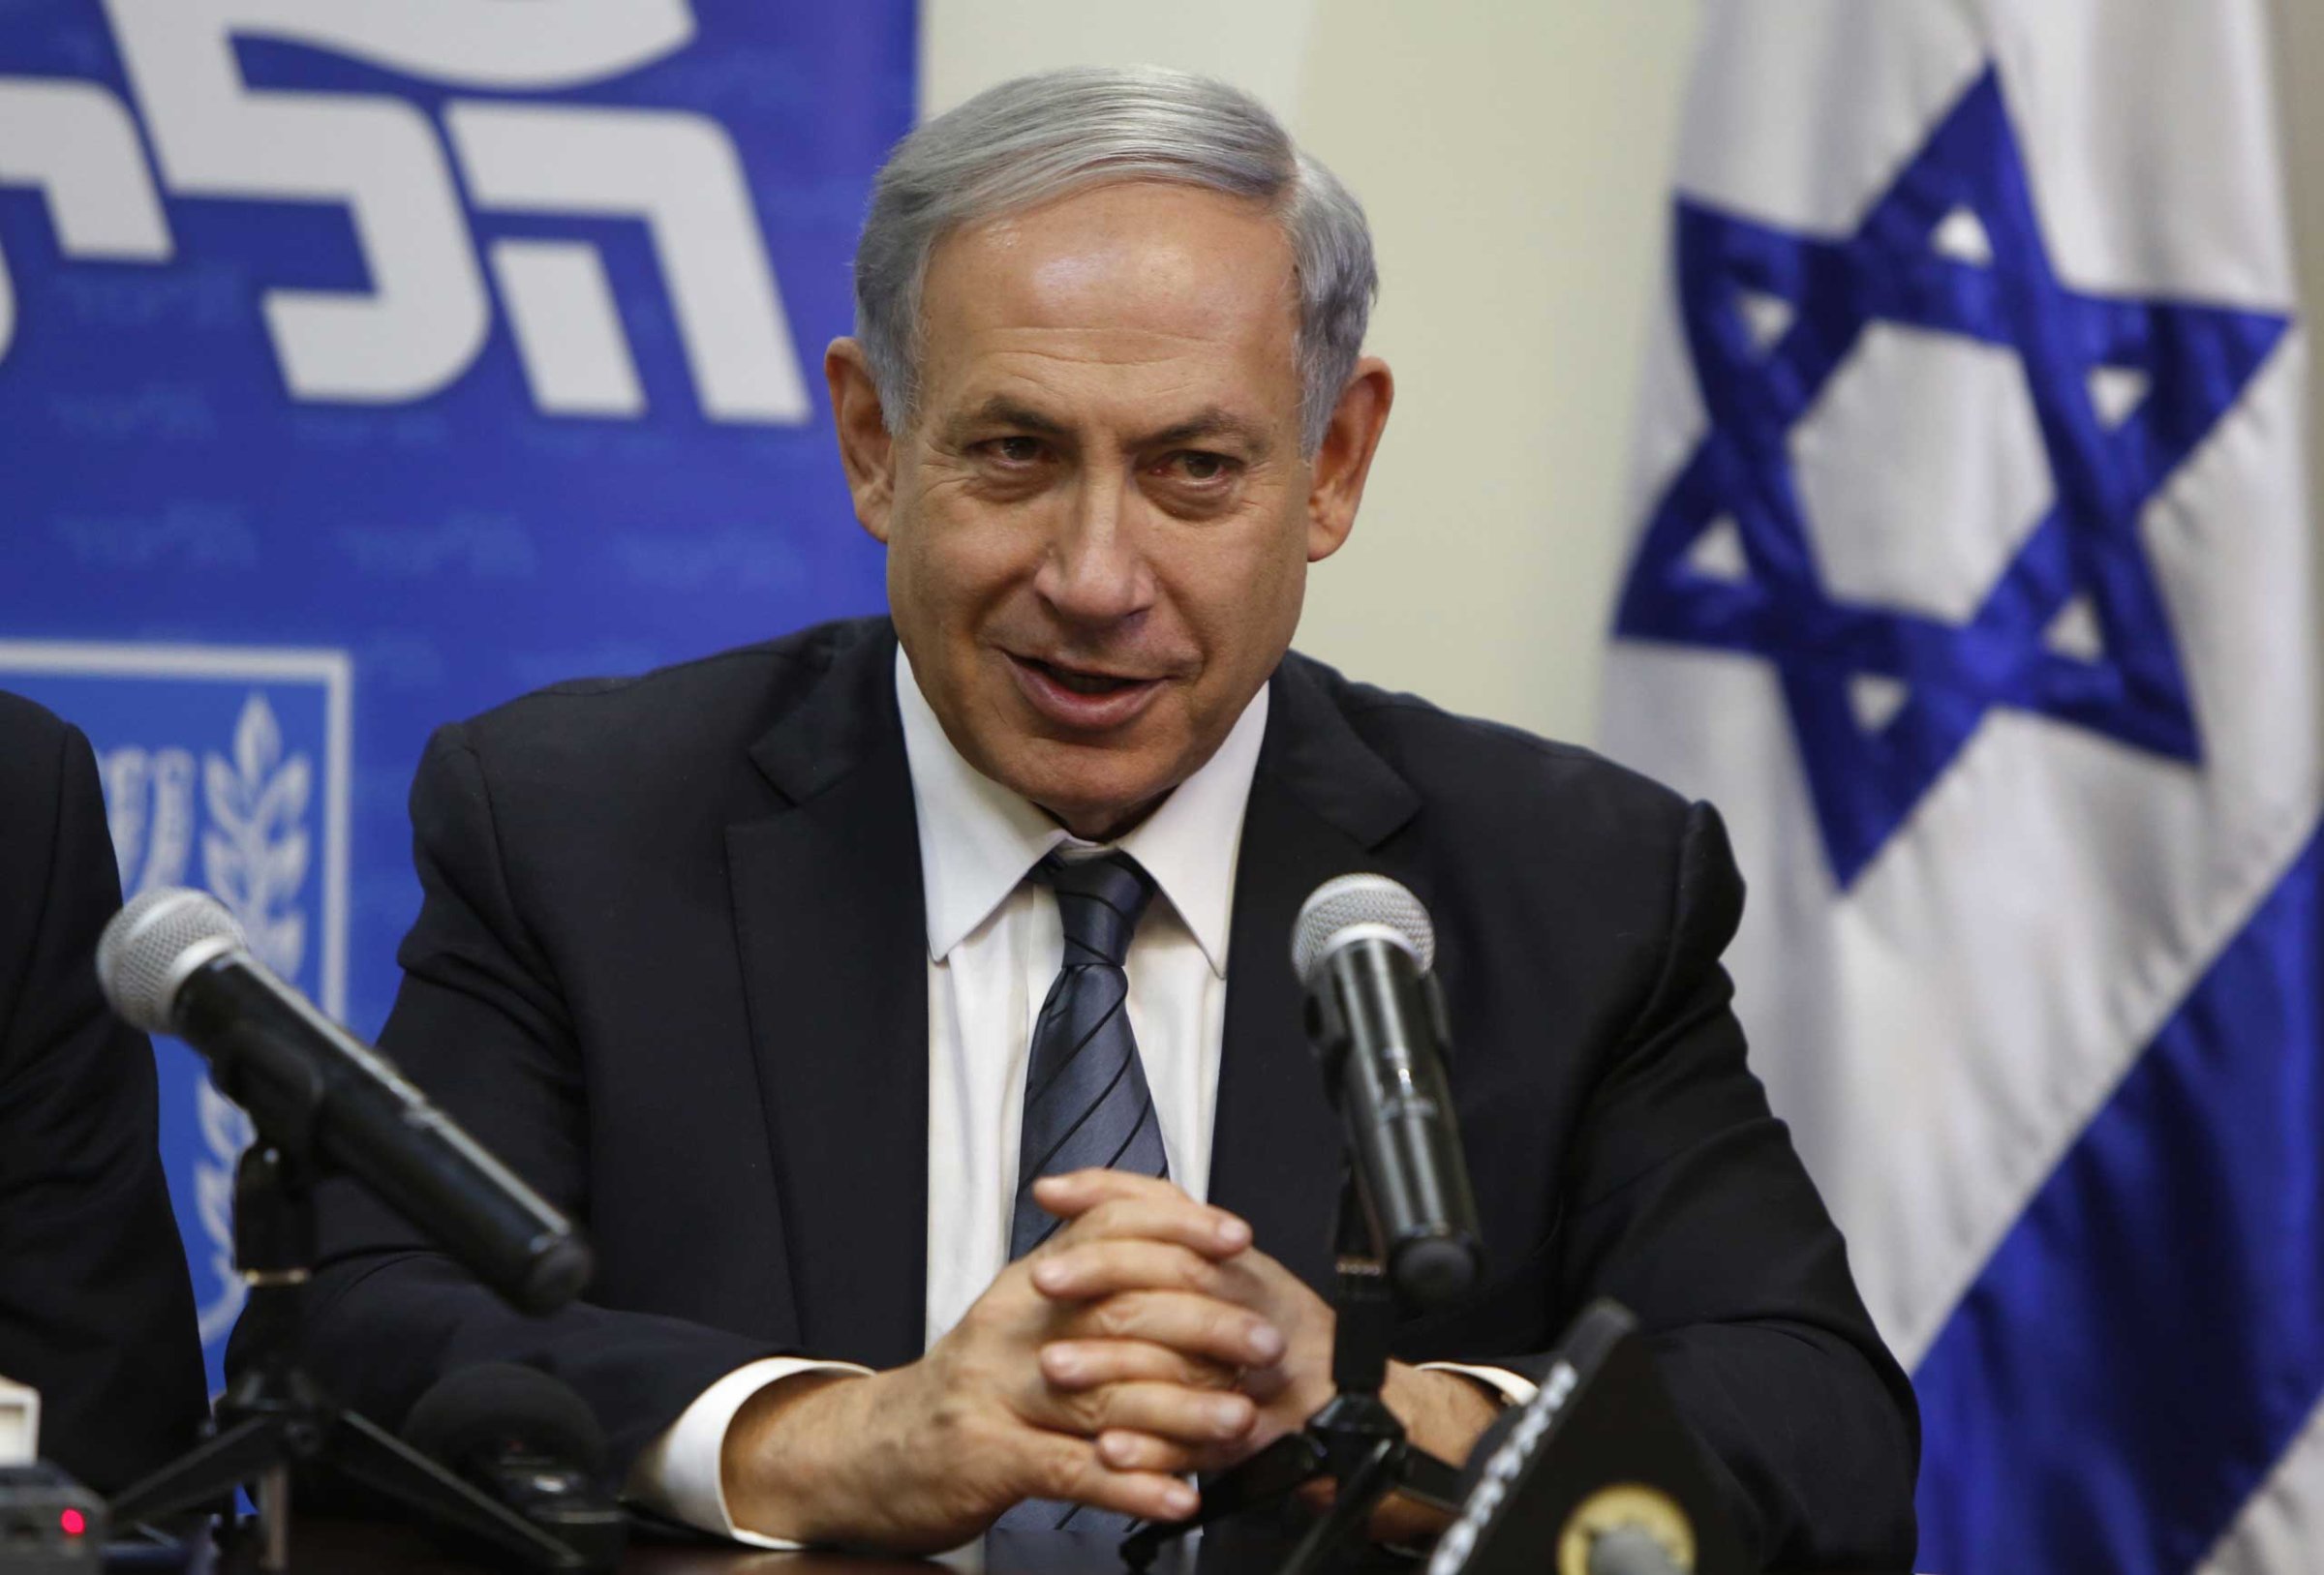 Israeli Prime Minister Benjamin Netanyahu speaks during a press conference at the Knesset in Jerusalem, on May 6, 2015, to announce reaching a coalition deal for forming a new government.